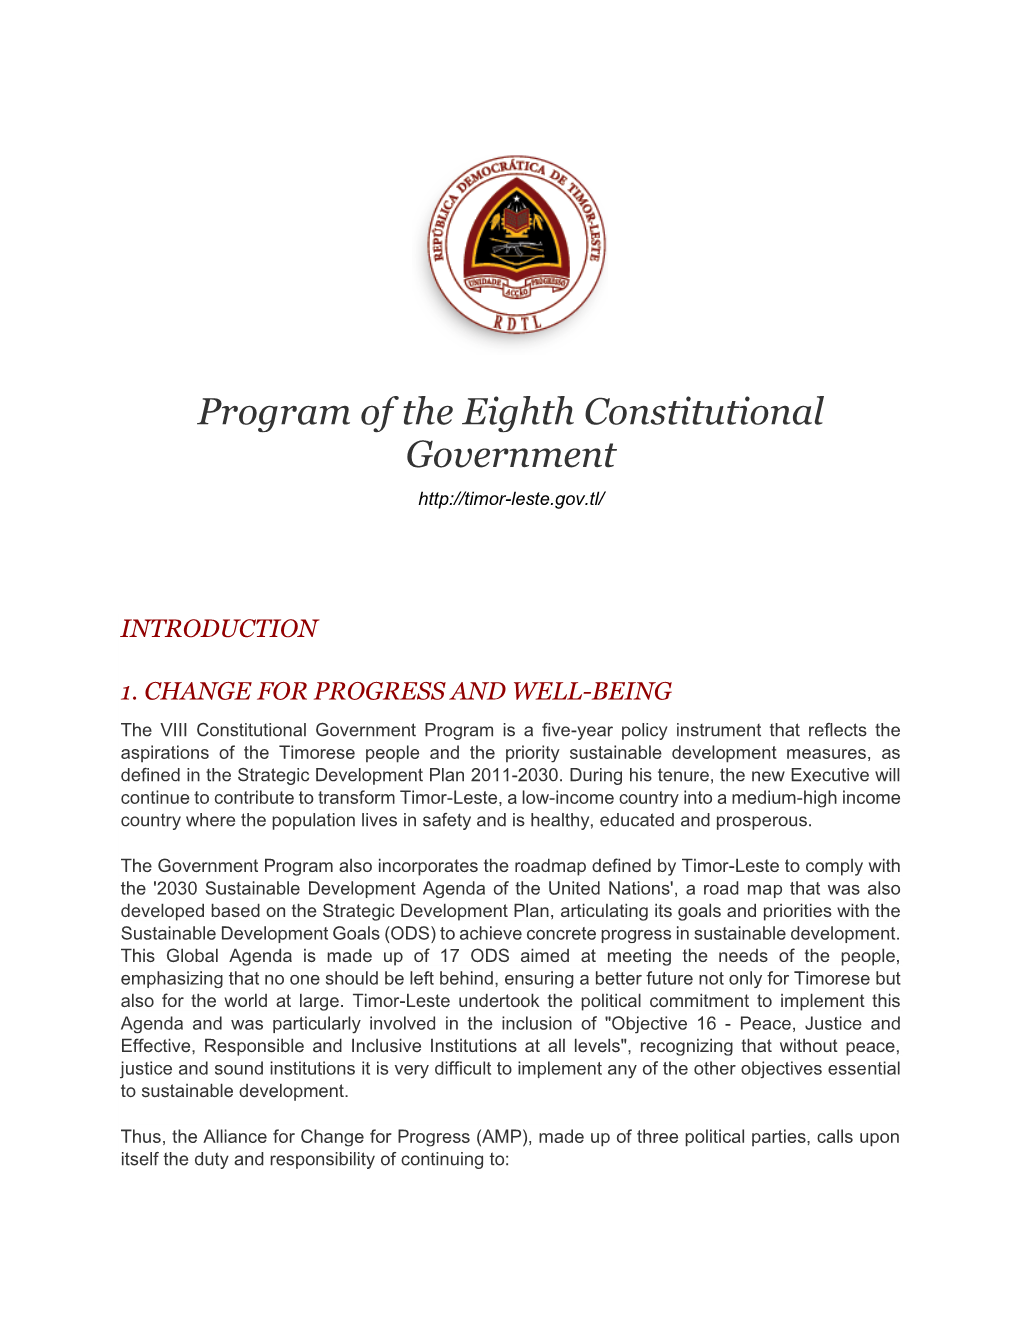 Program of the Eighth Constitutional Government of Timor-Leste, 2018-2023